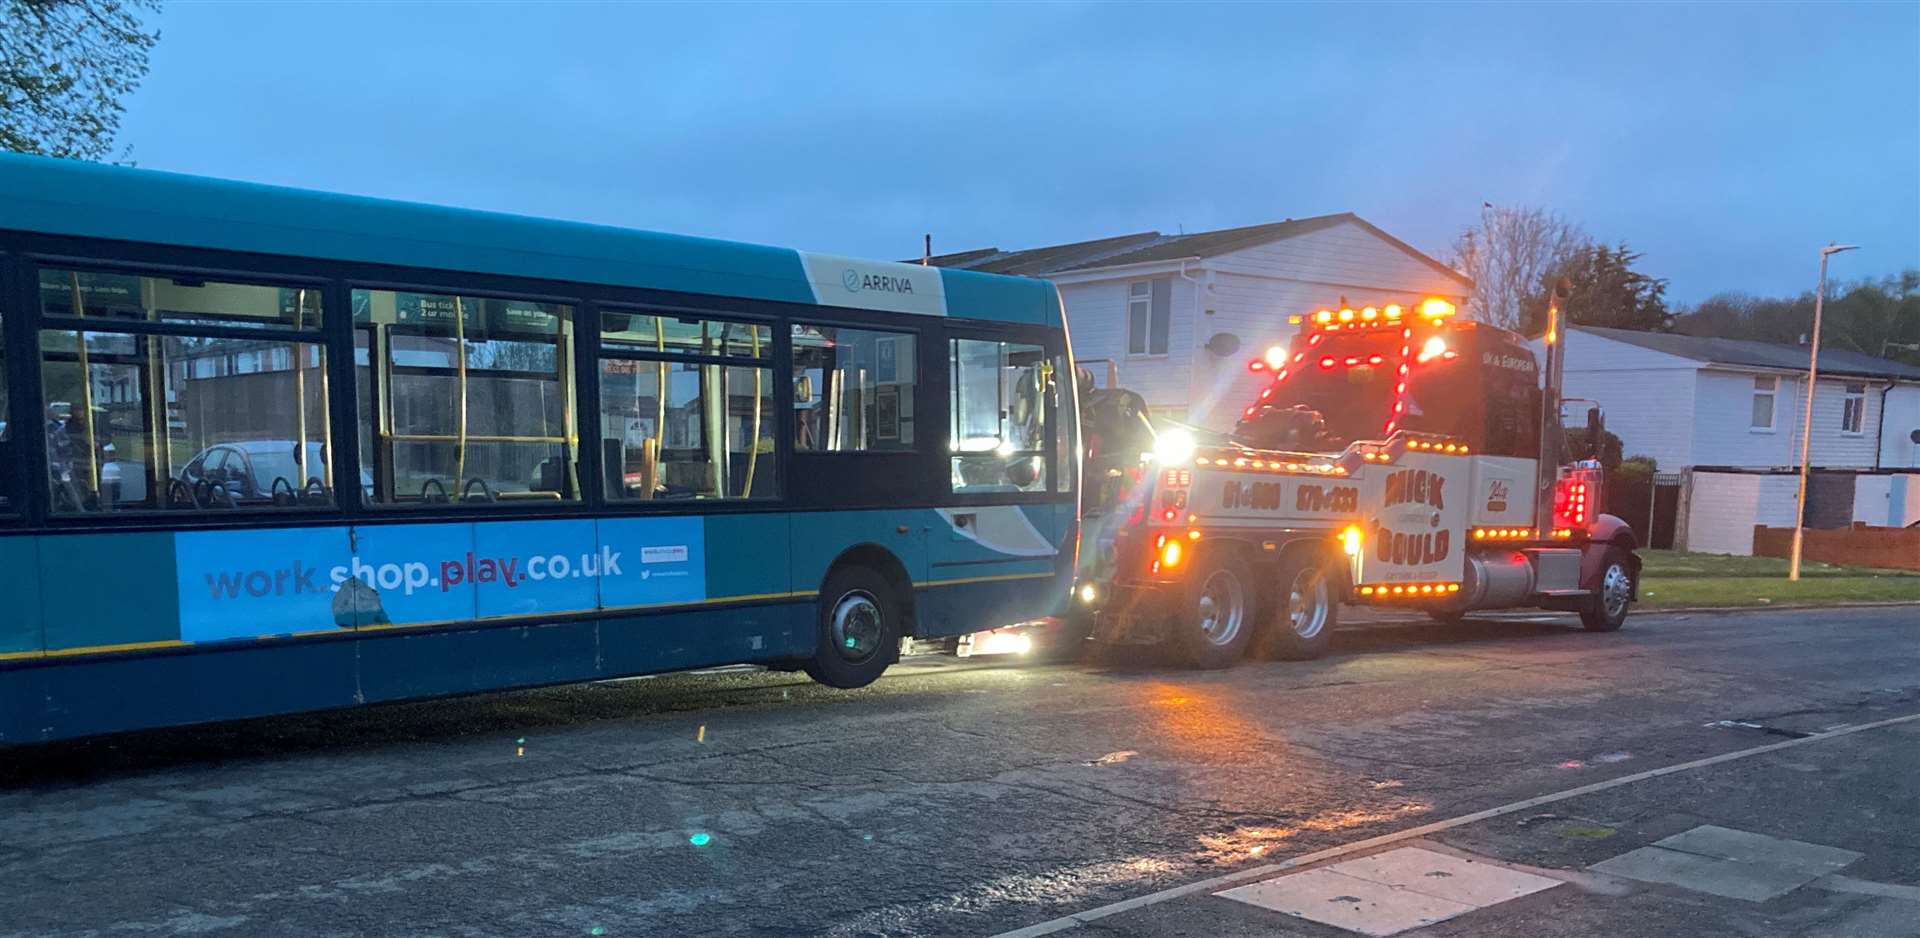 A truck towing the bus away following the incident. Picture: Jack Sullivan